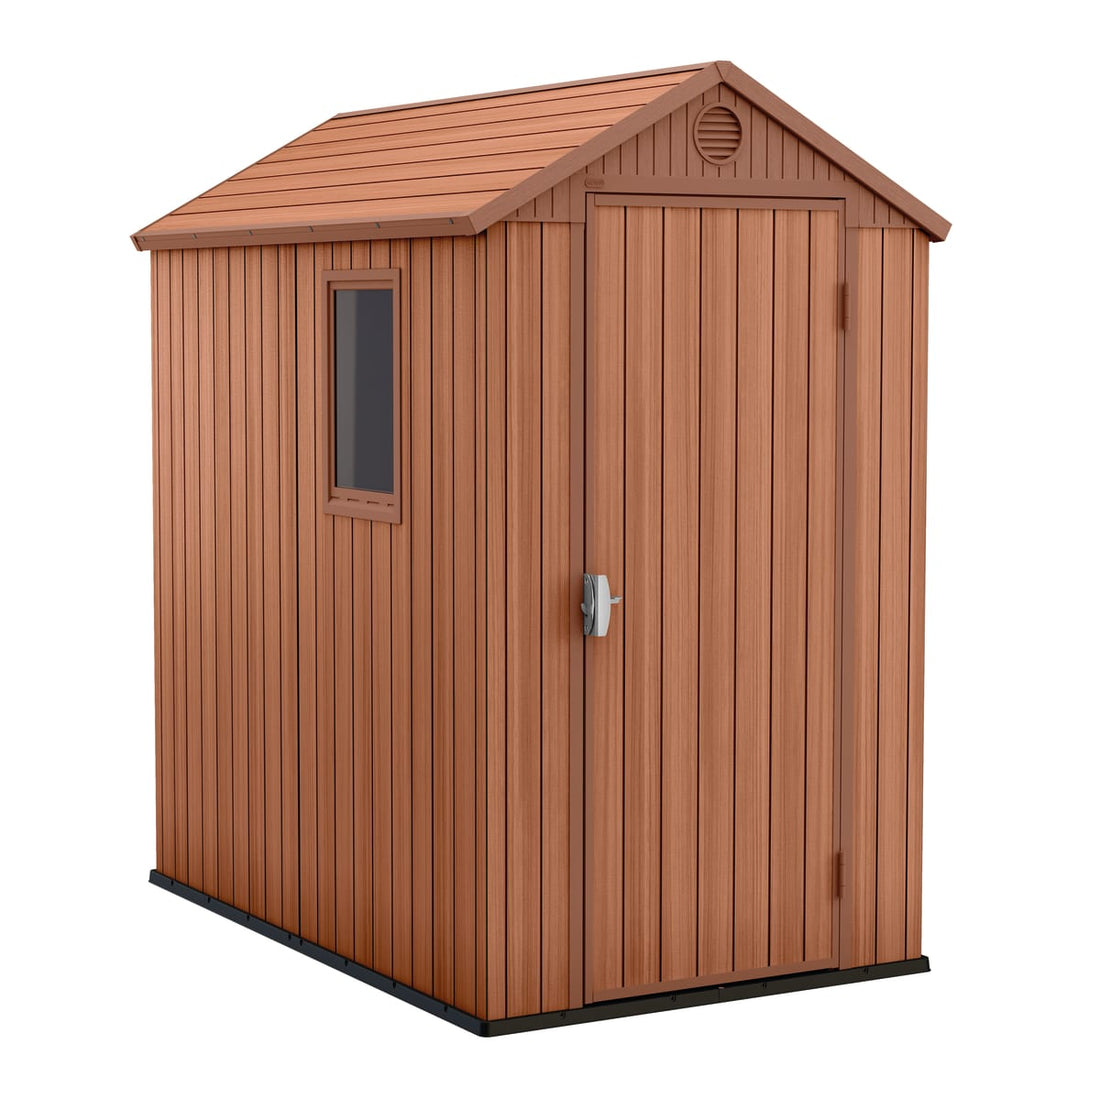 LITTLE HOUSE DARWIN MOD 4X6 THICKNESS 16MM EXTERNAL DIMENSIONS 184.5X118.8X205H FLOOR INCLUDED